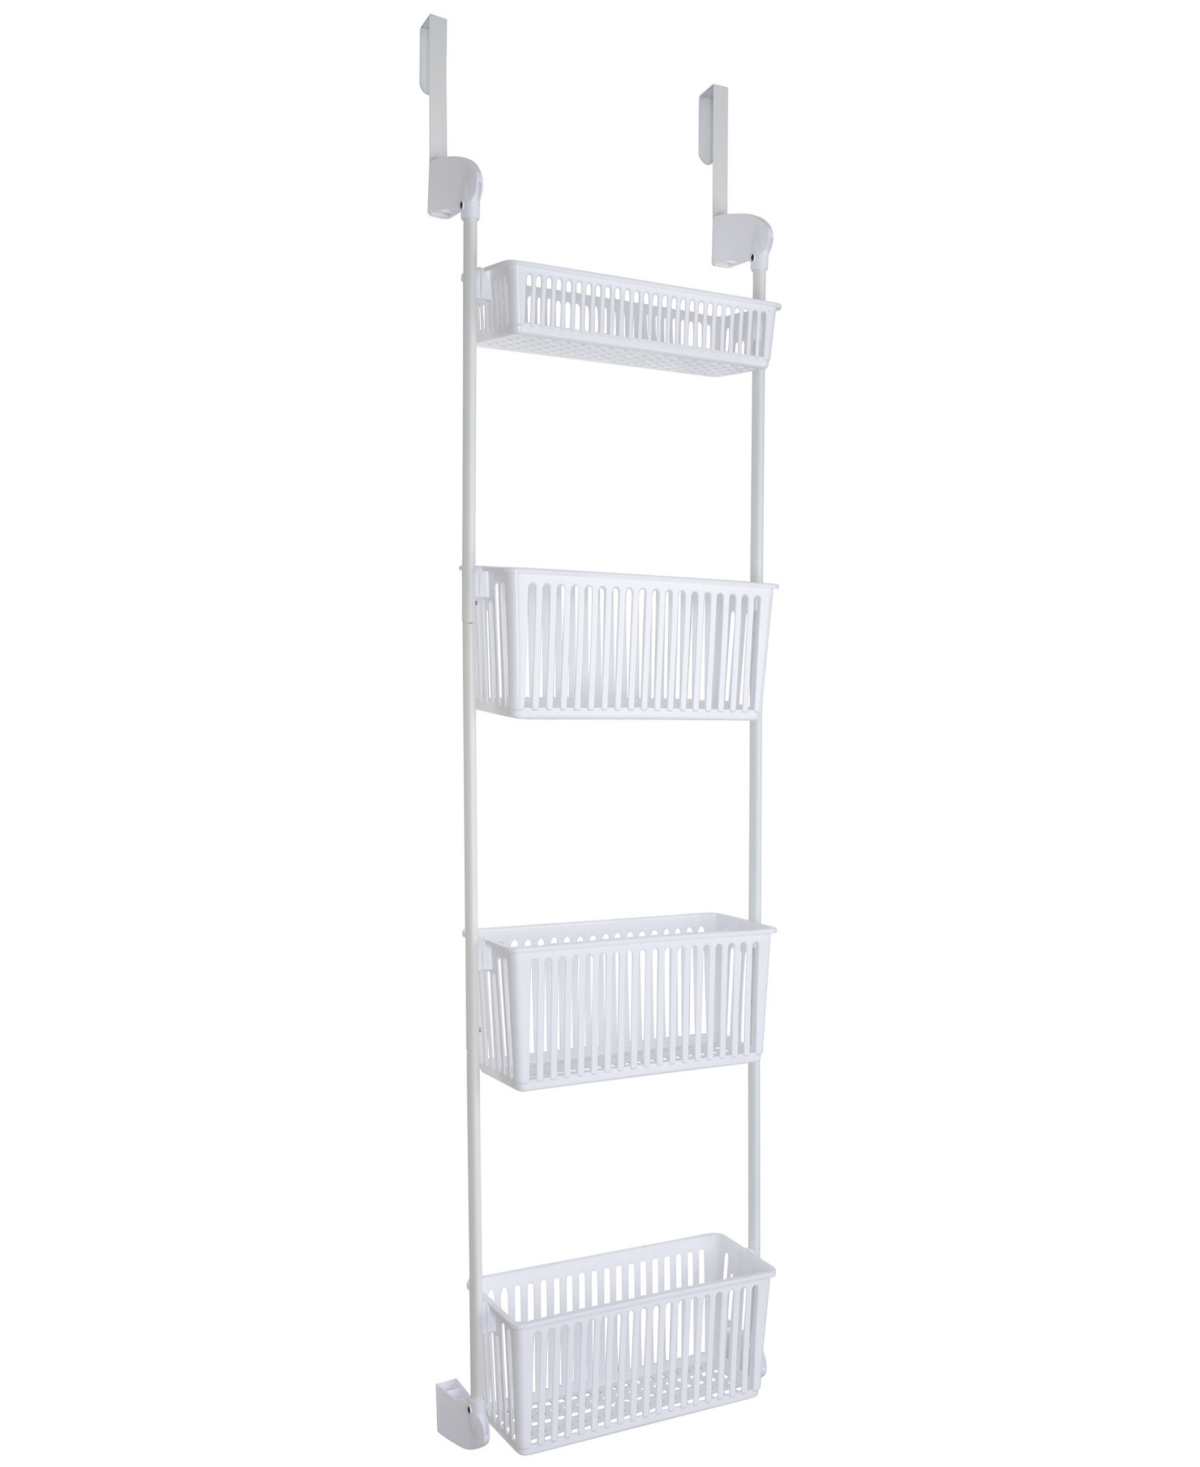 Smart Design 4-tier Over-the-door Hanging Pantry Organizer With Deep Baskets In White